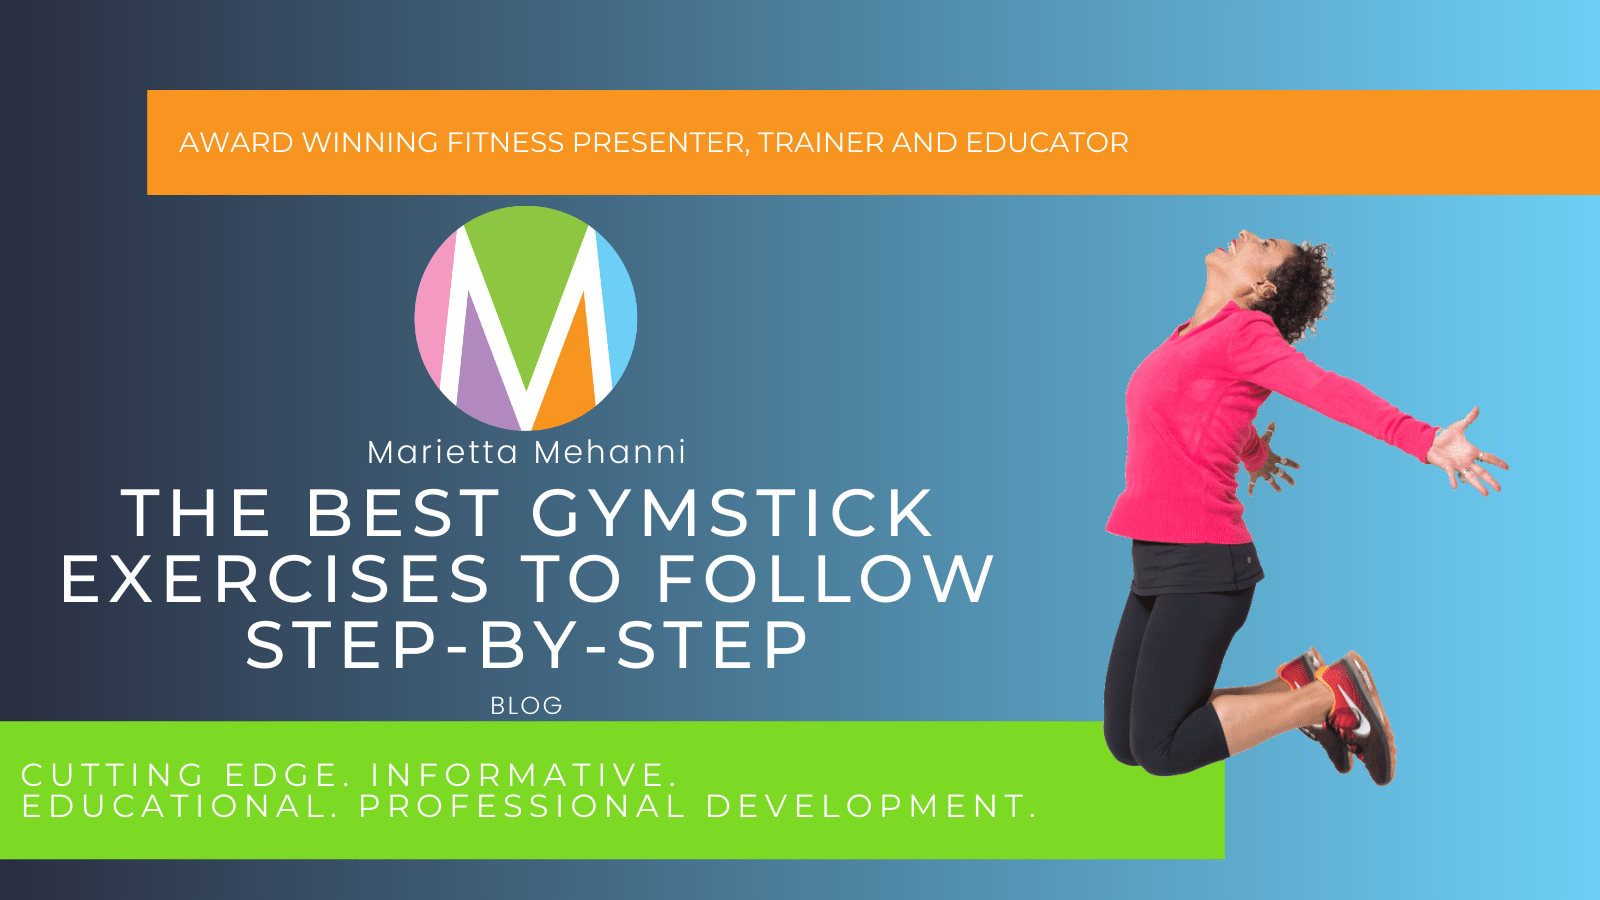 blog the best gymstick exercises to follow step by step marietta mehanni education professional development group fitness personal training guru